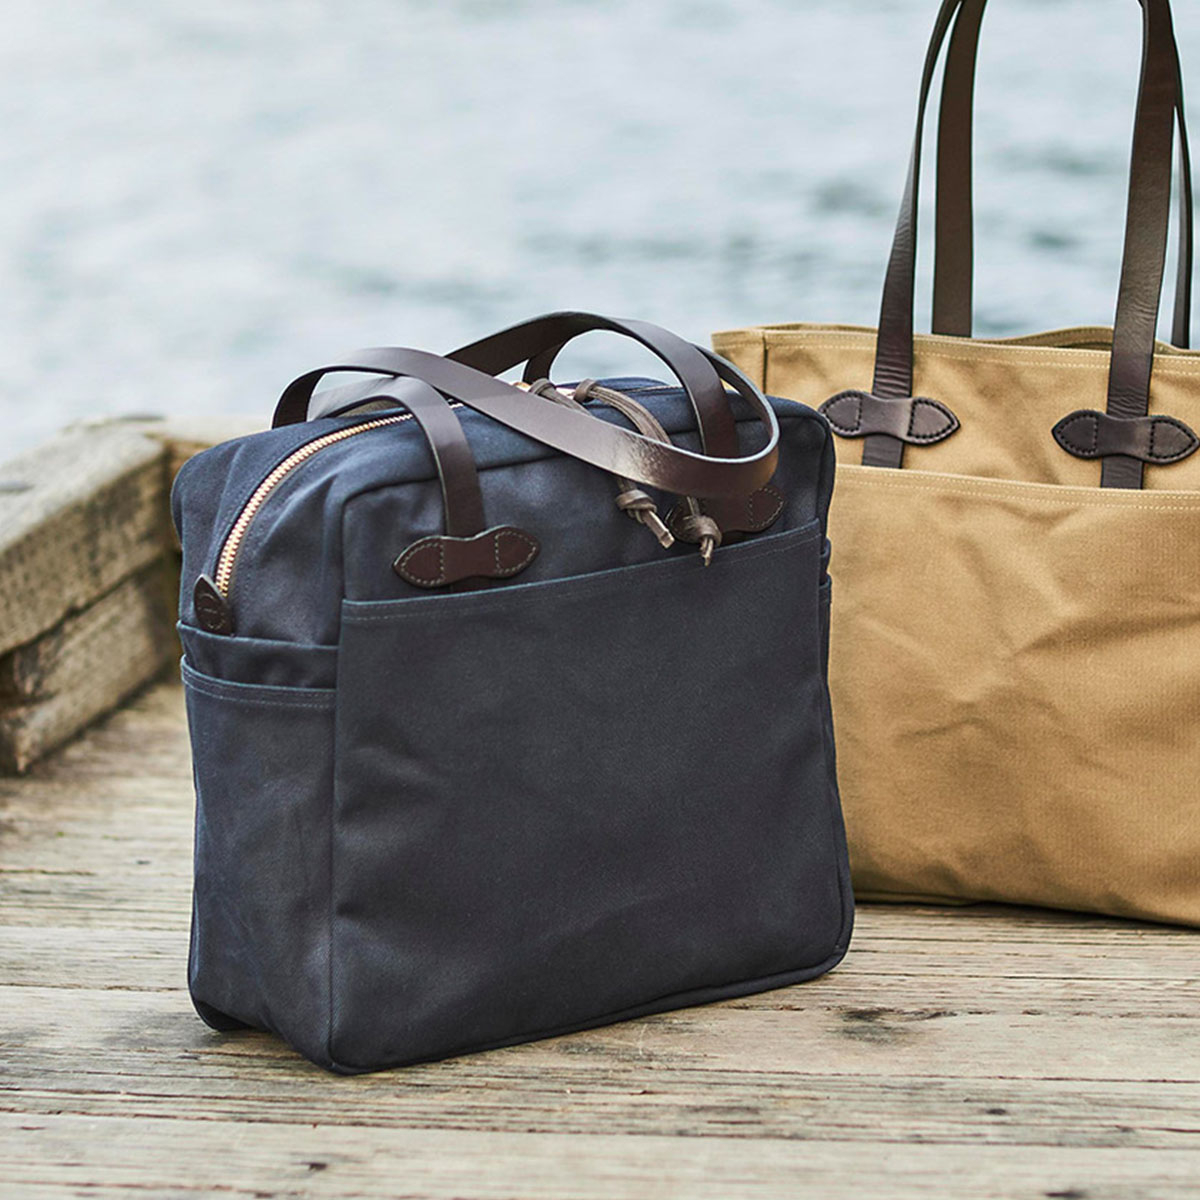 Filson Rugged Twill Tote Bag With Zipper Navy, legendary Tote Bag for on the go